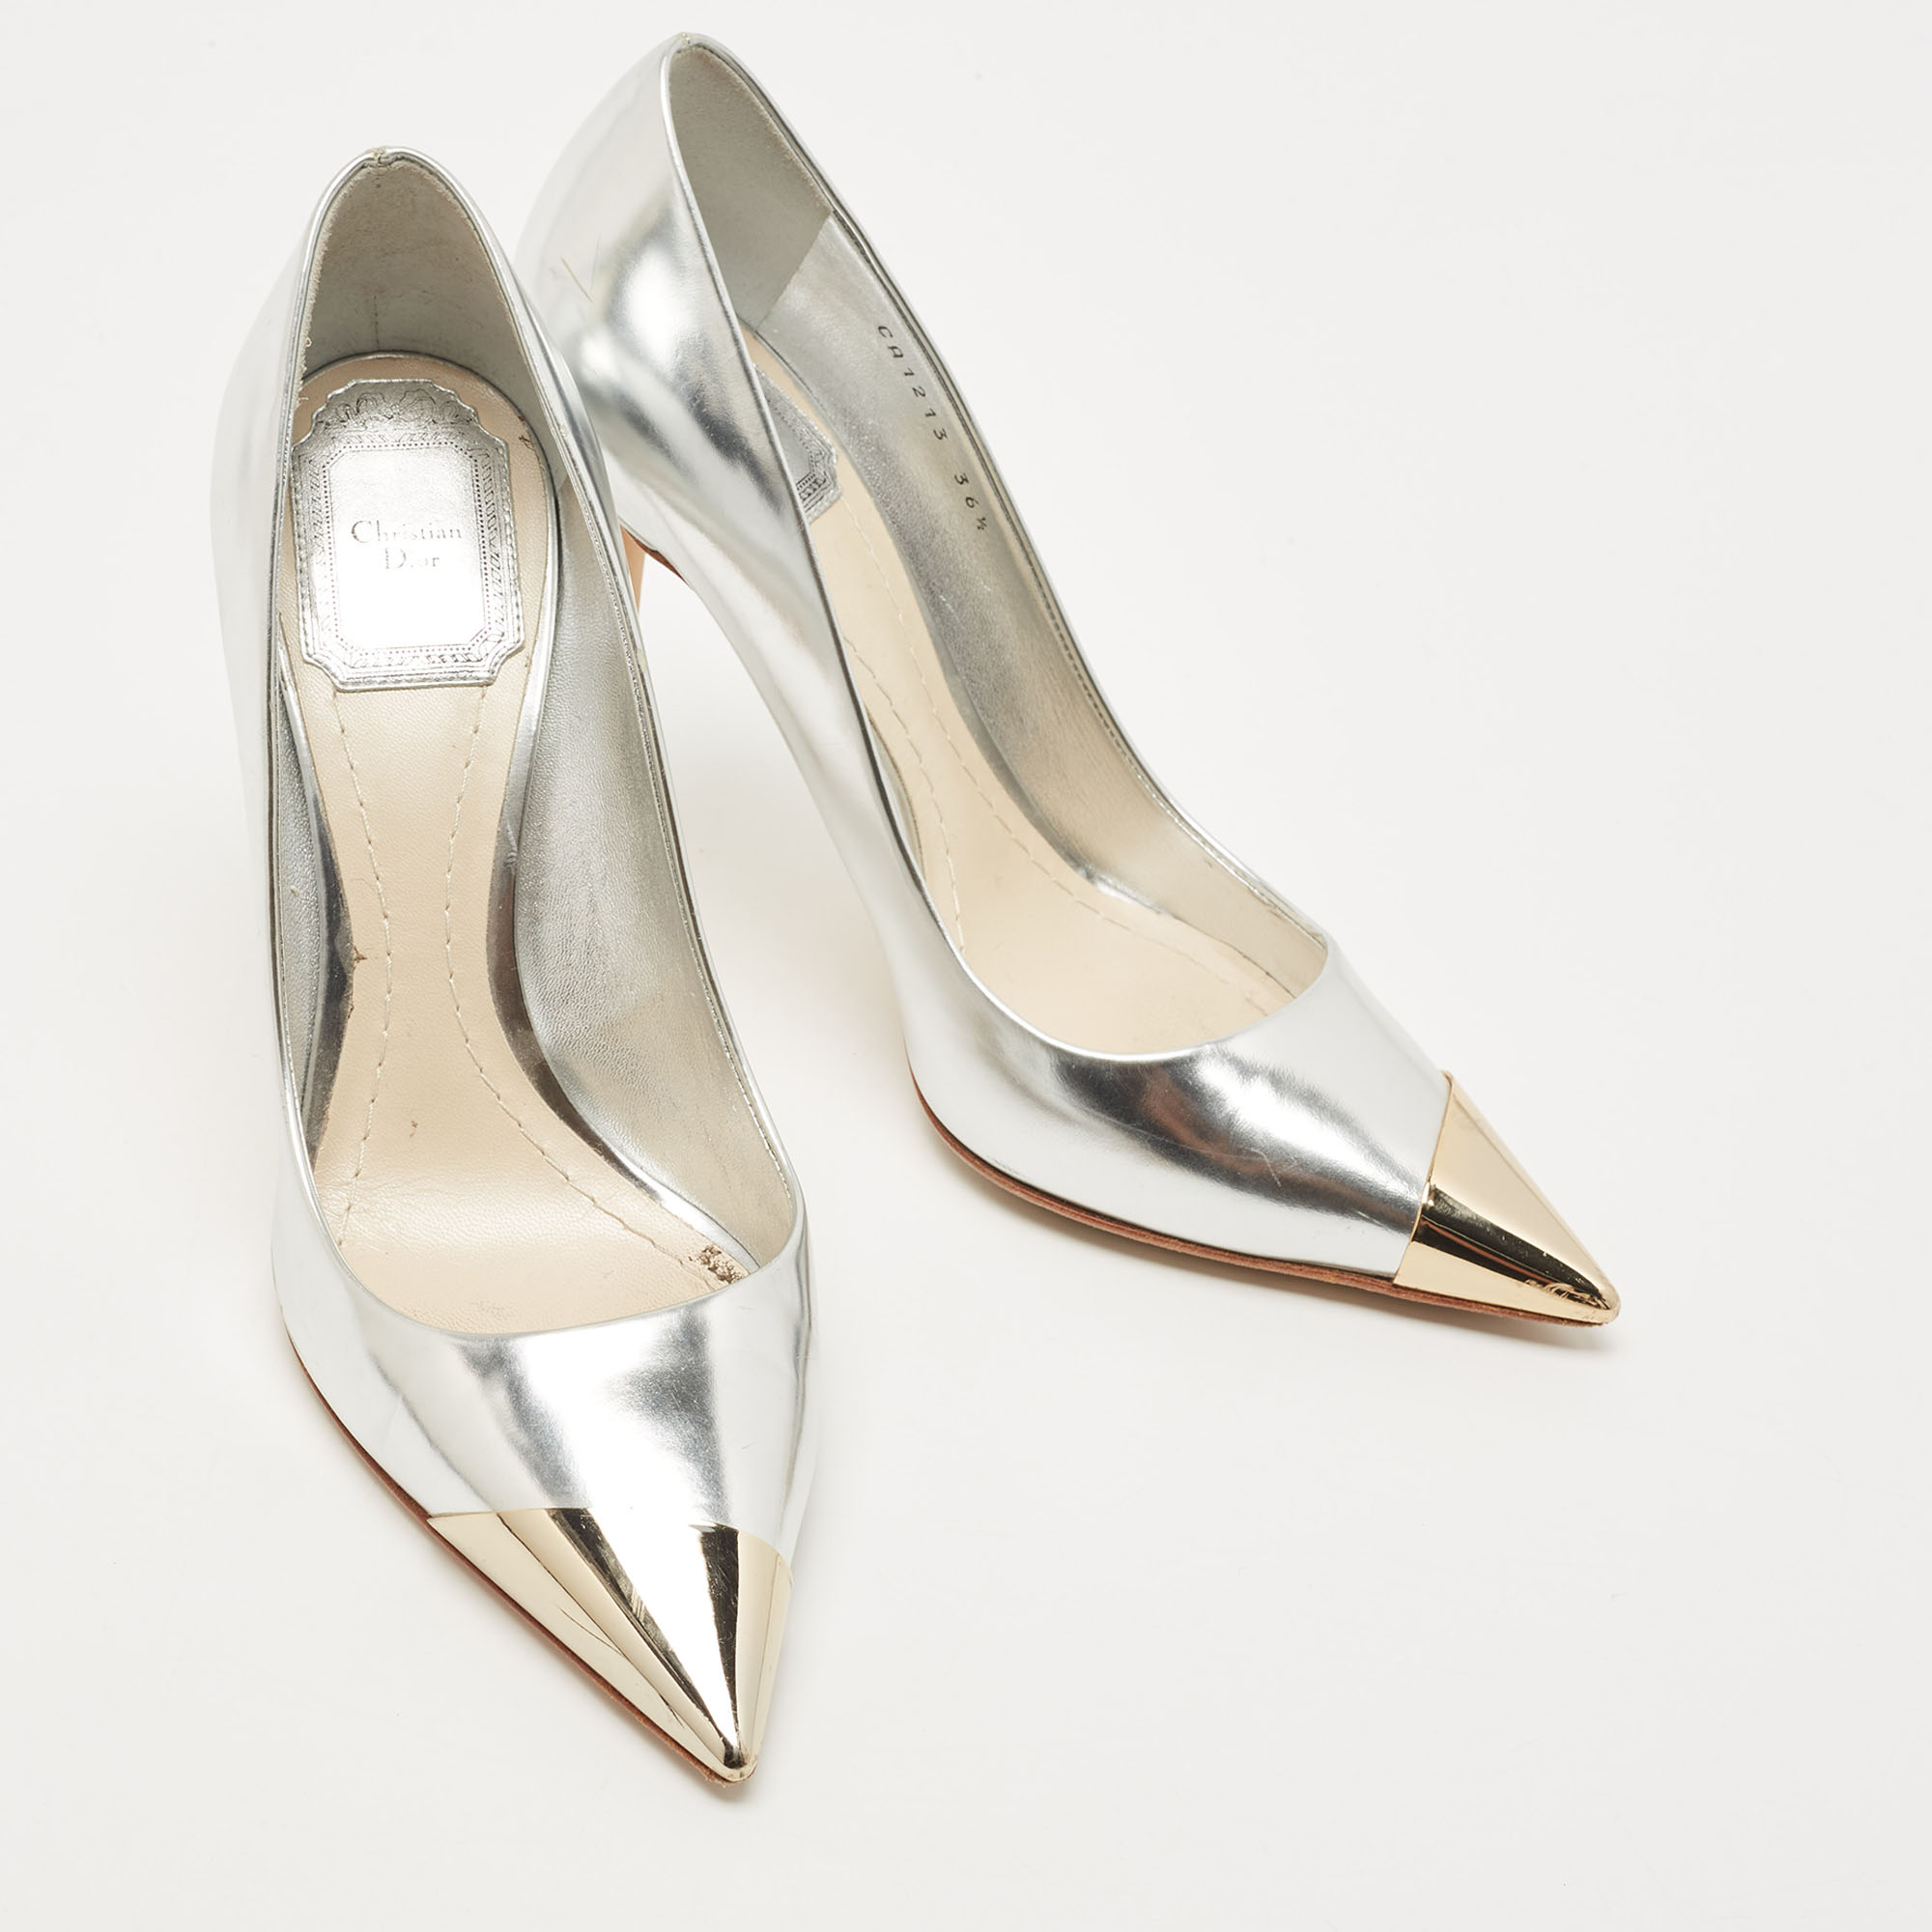 Dior Silver Leather Pointed Toe Pumps Size 36.5